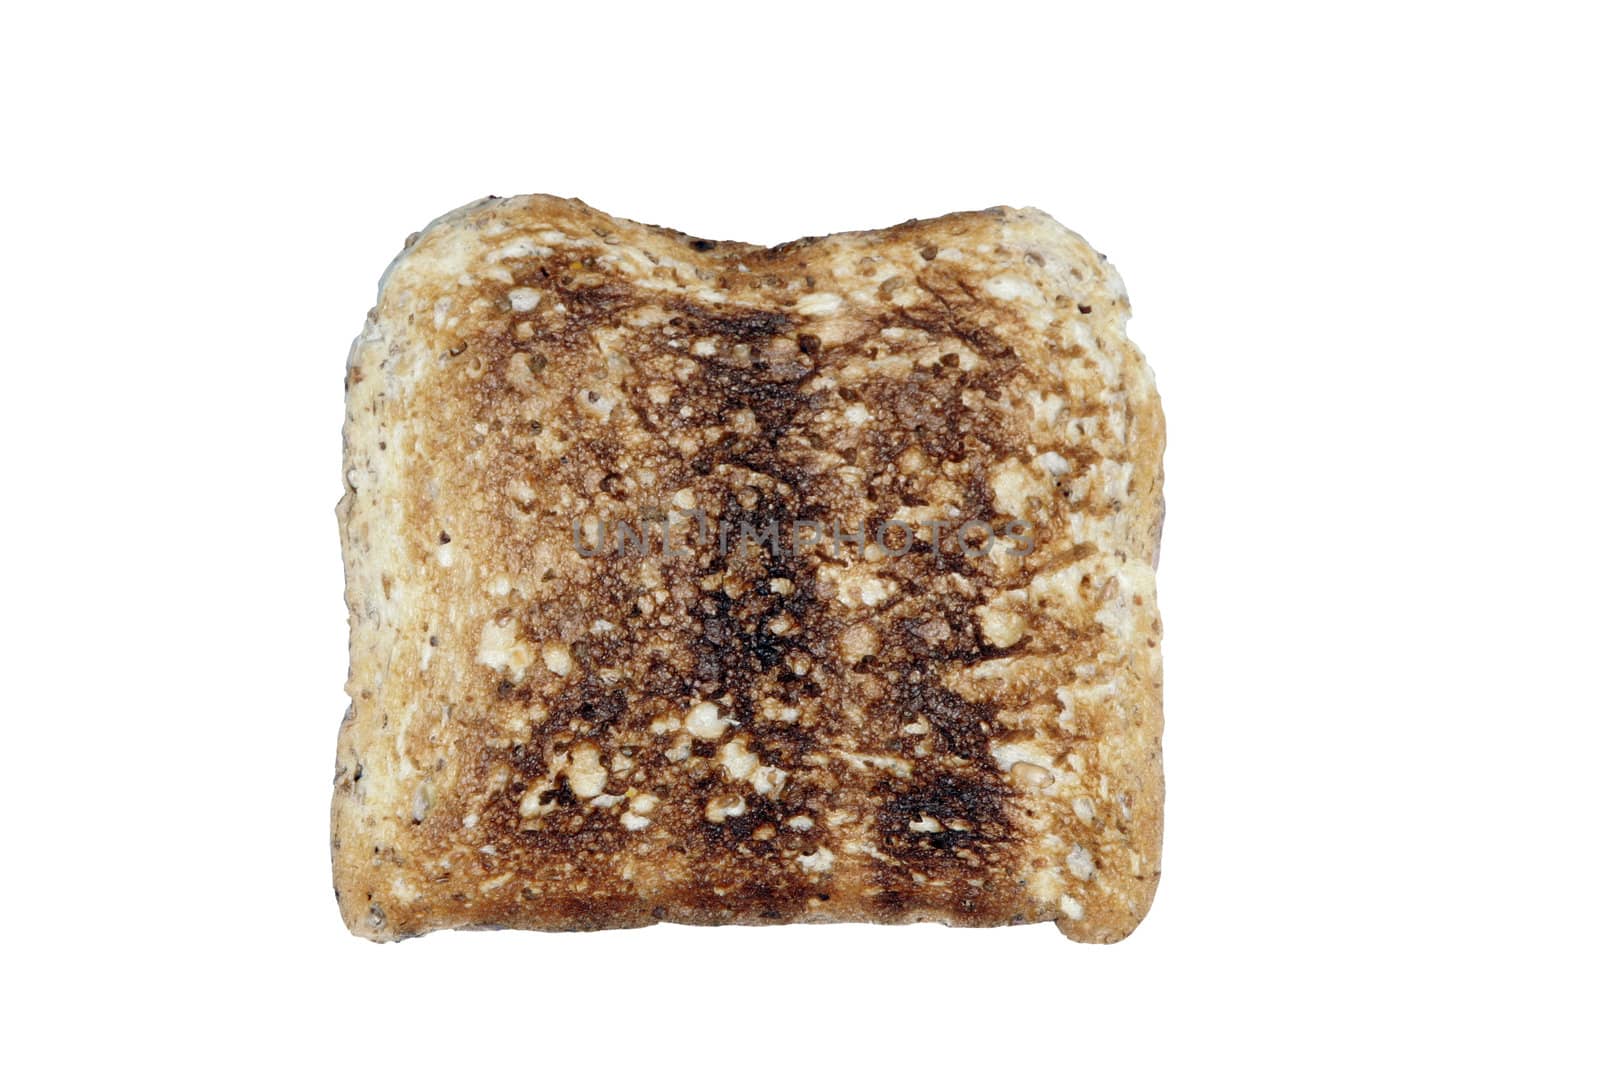 Burnt Grain Toasts / Bread On A White Background